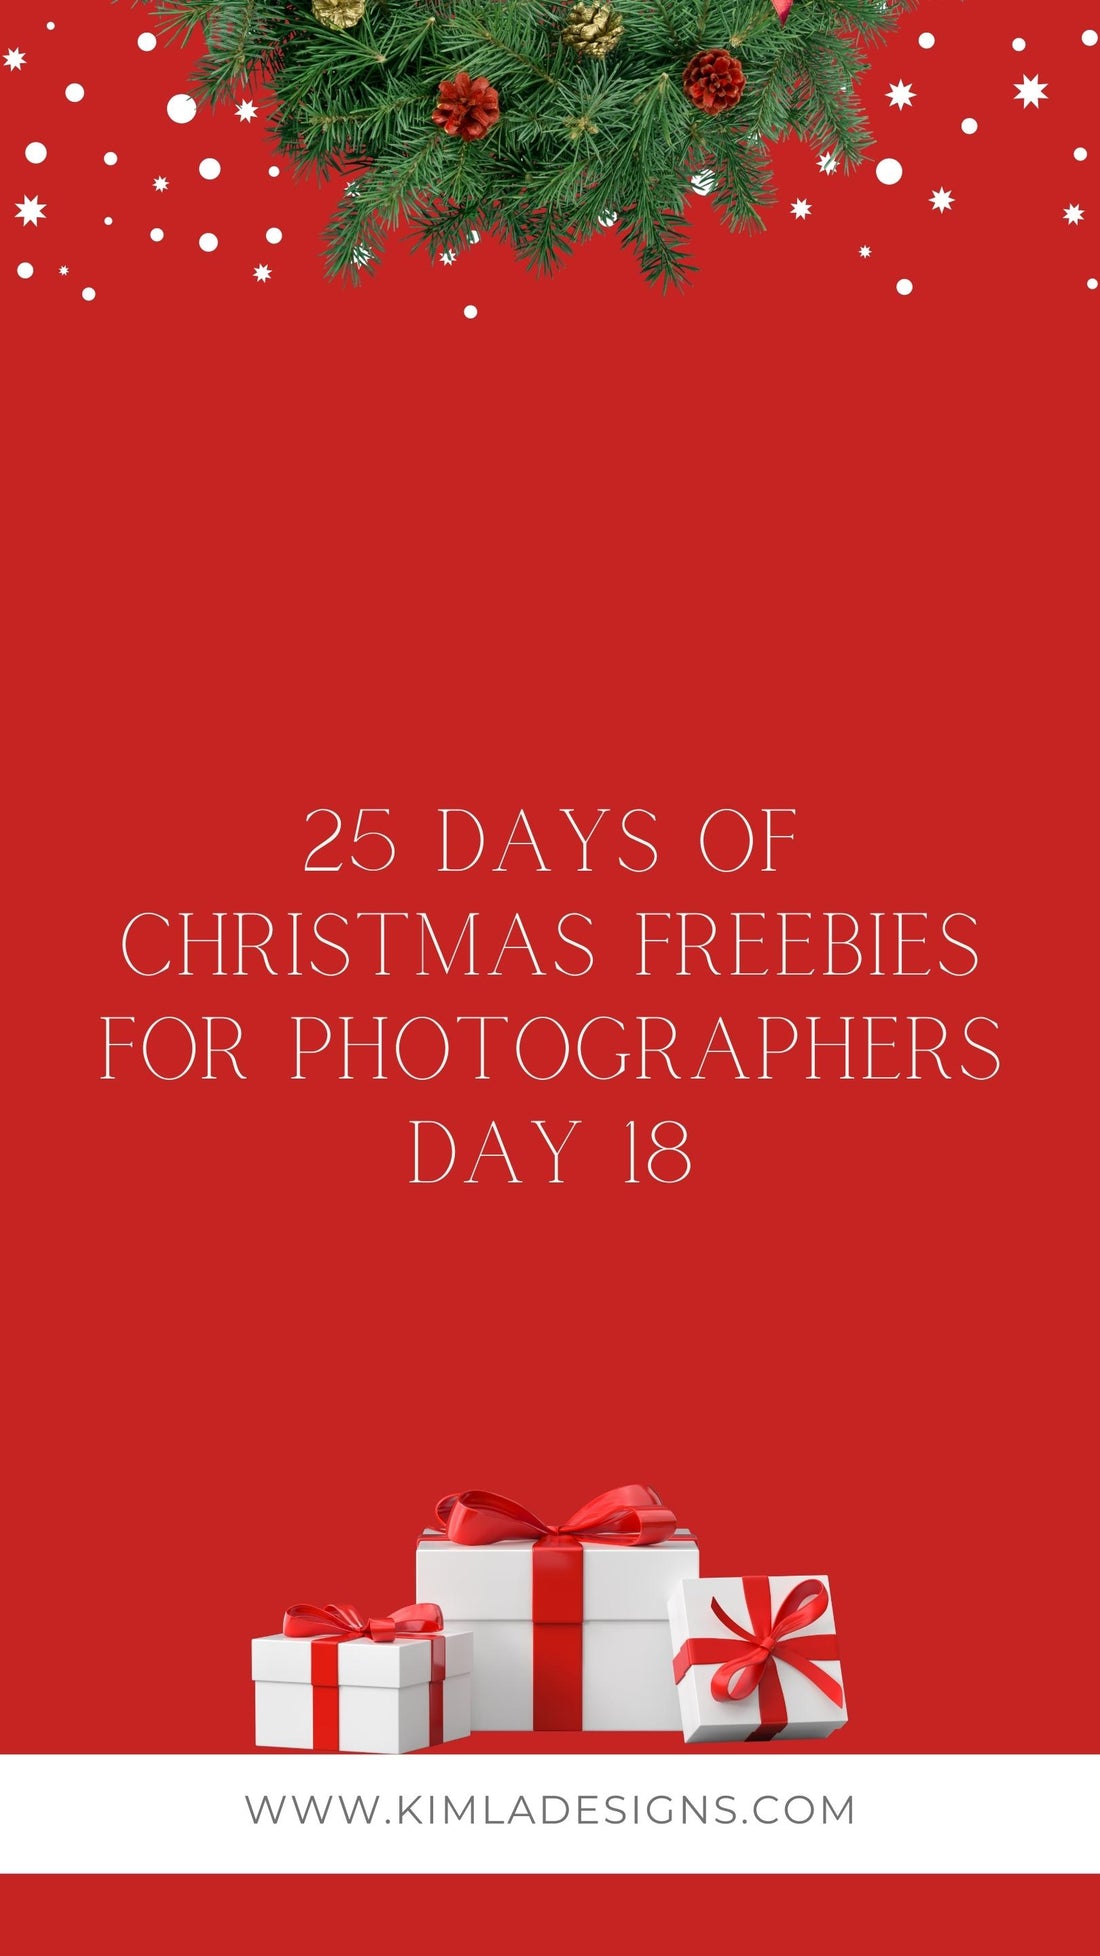 25 Days of Christmas Freebies Day 18th